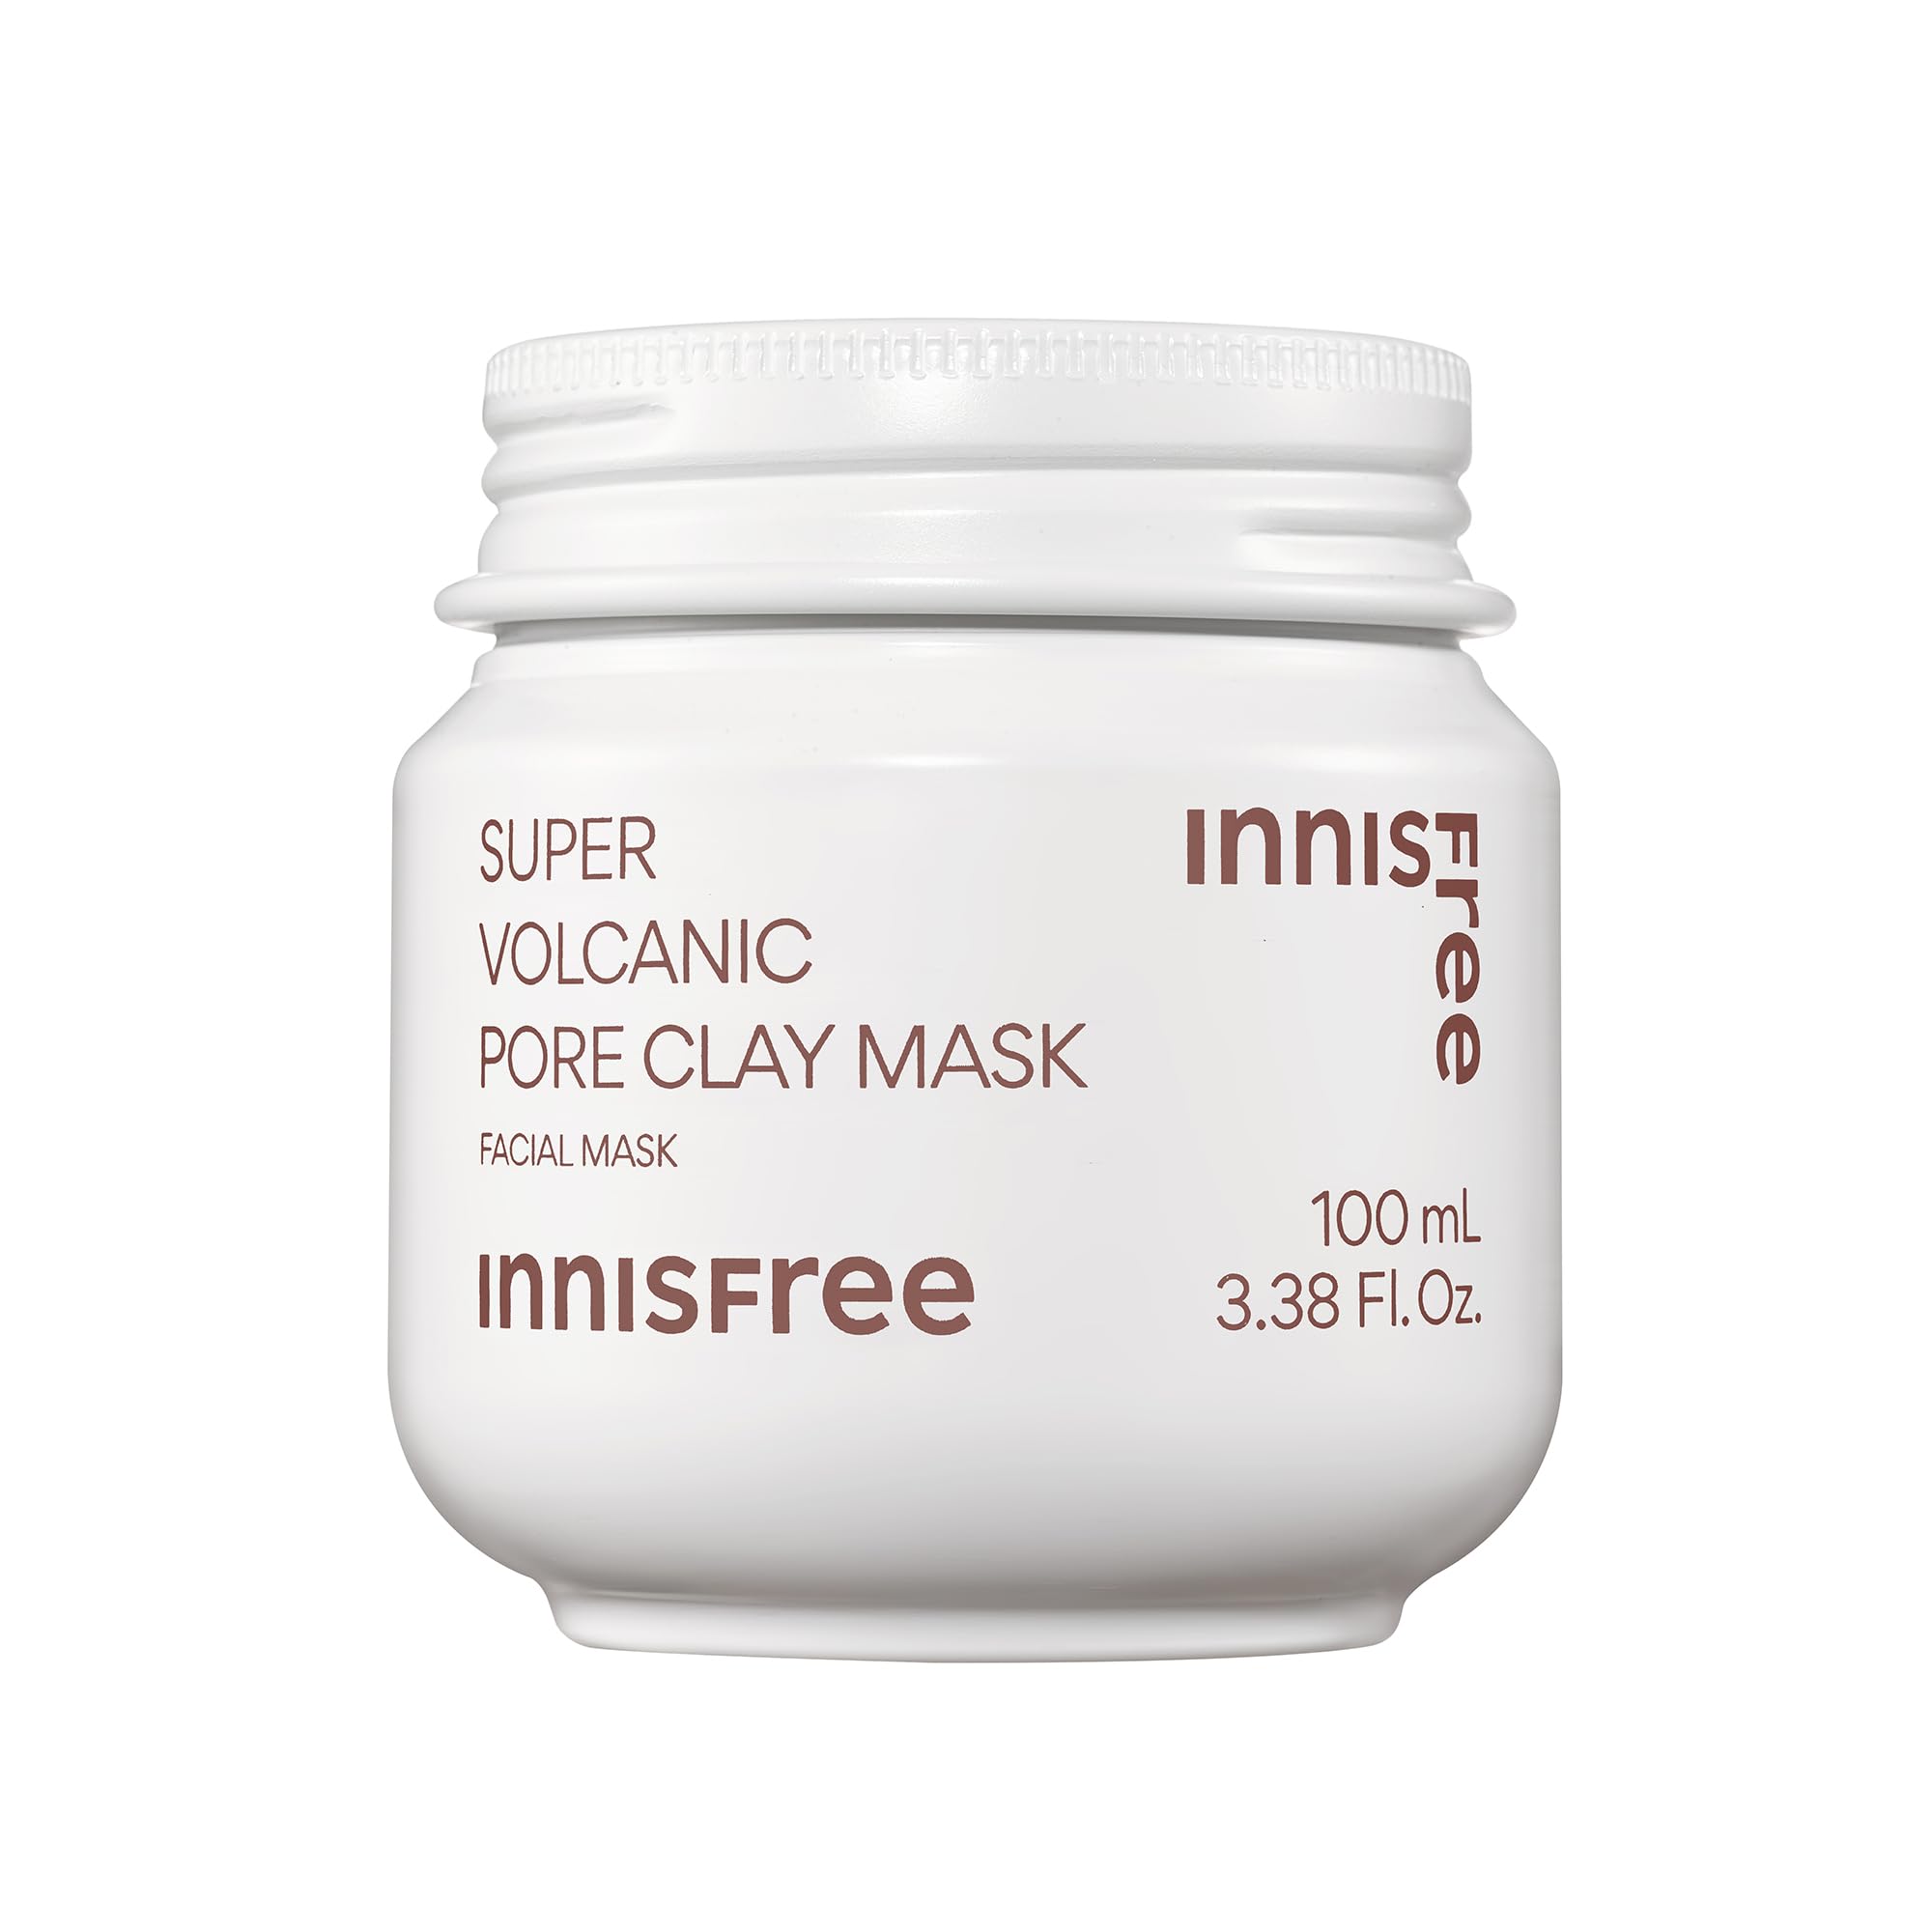 innisfree Super Volcanic Pore Clearing Clay Mask Face Treatment